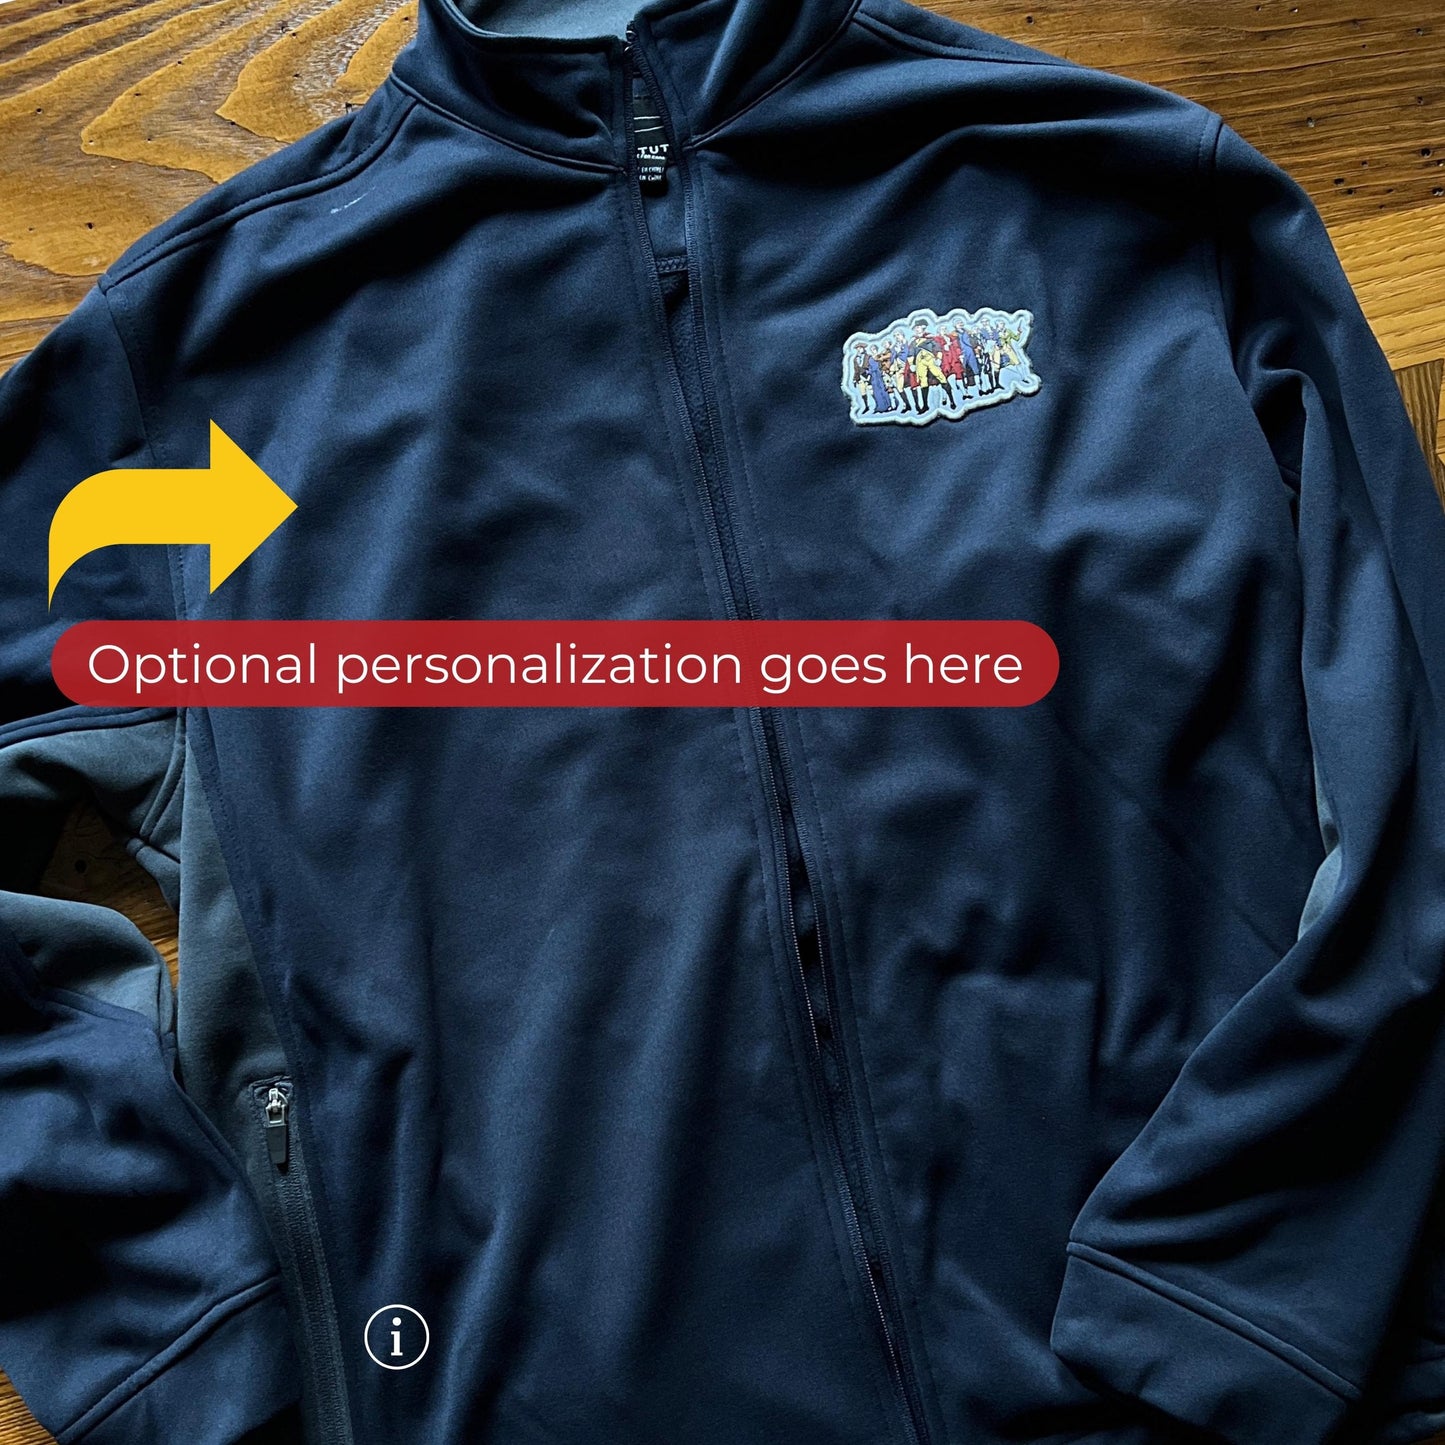 "Revolutionary Superheroes" Jacket with your name